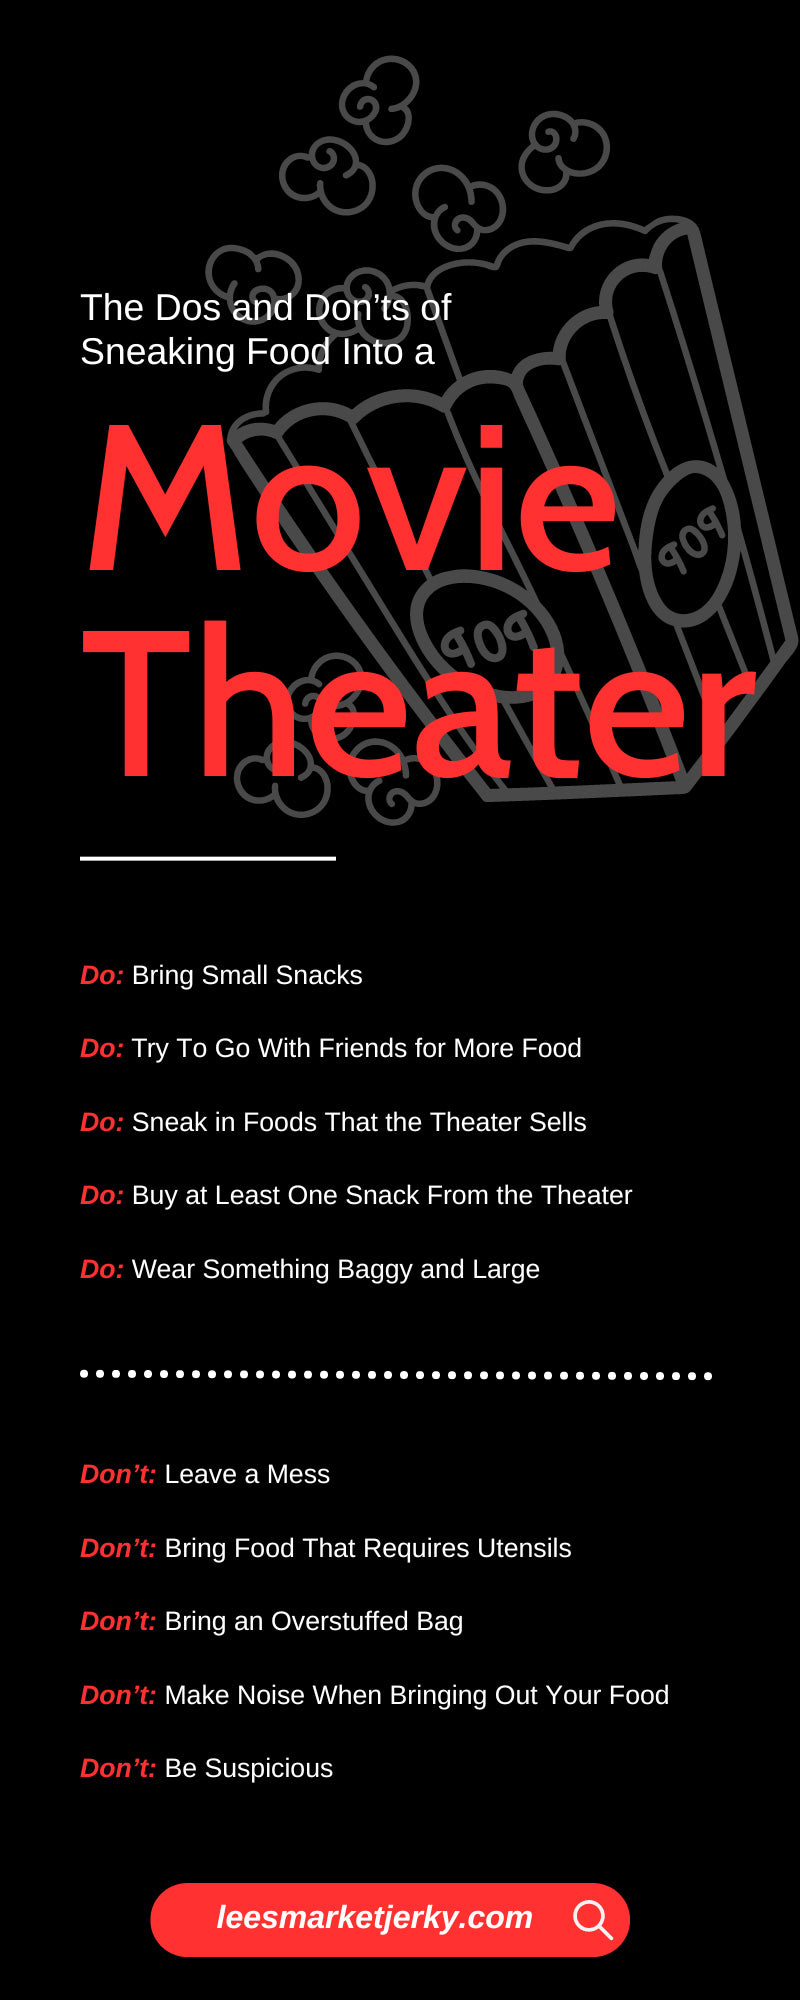 The Dos and Don’ts of Sneaking Food Into a Movie Theater